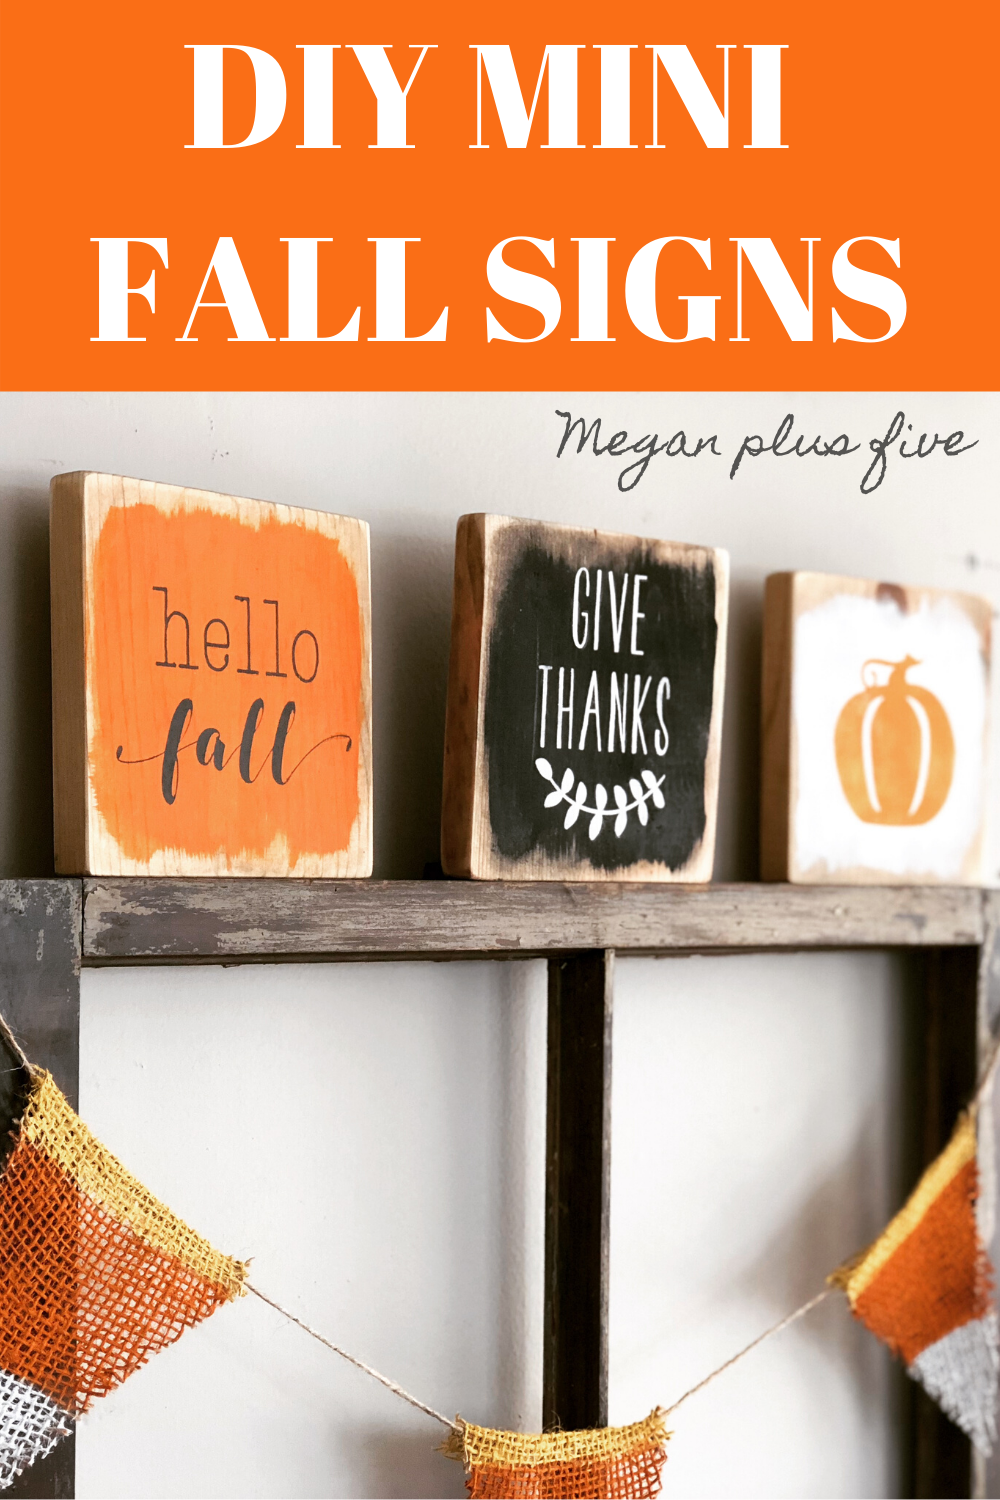 Diy Stenciled Rustic Fall Signs Megan, How To Make Your Own Decor Signs